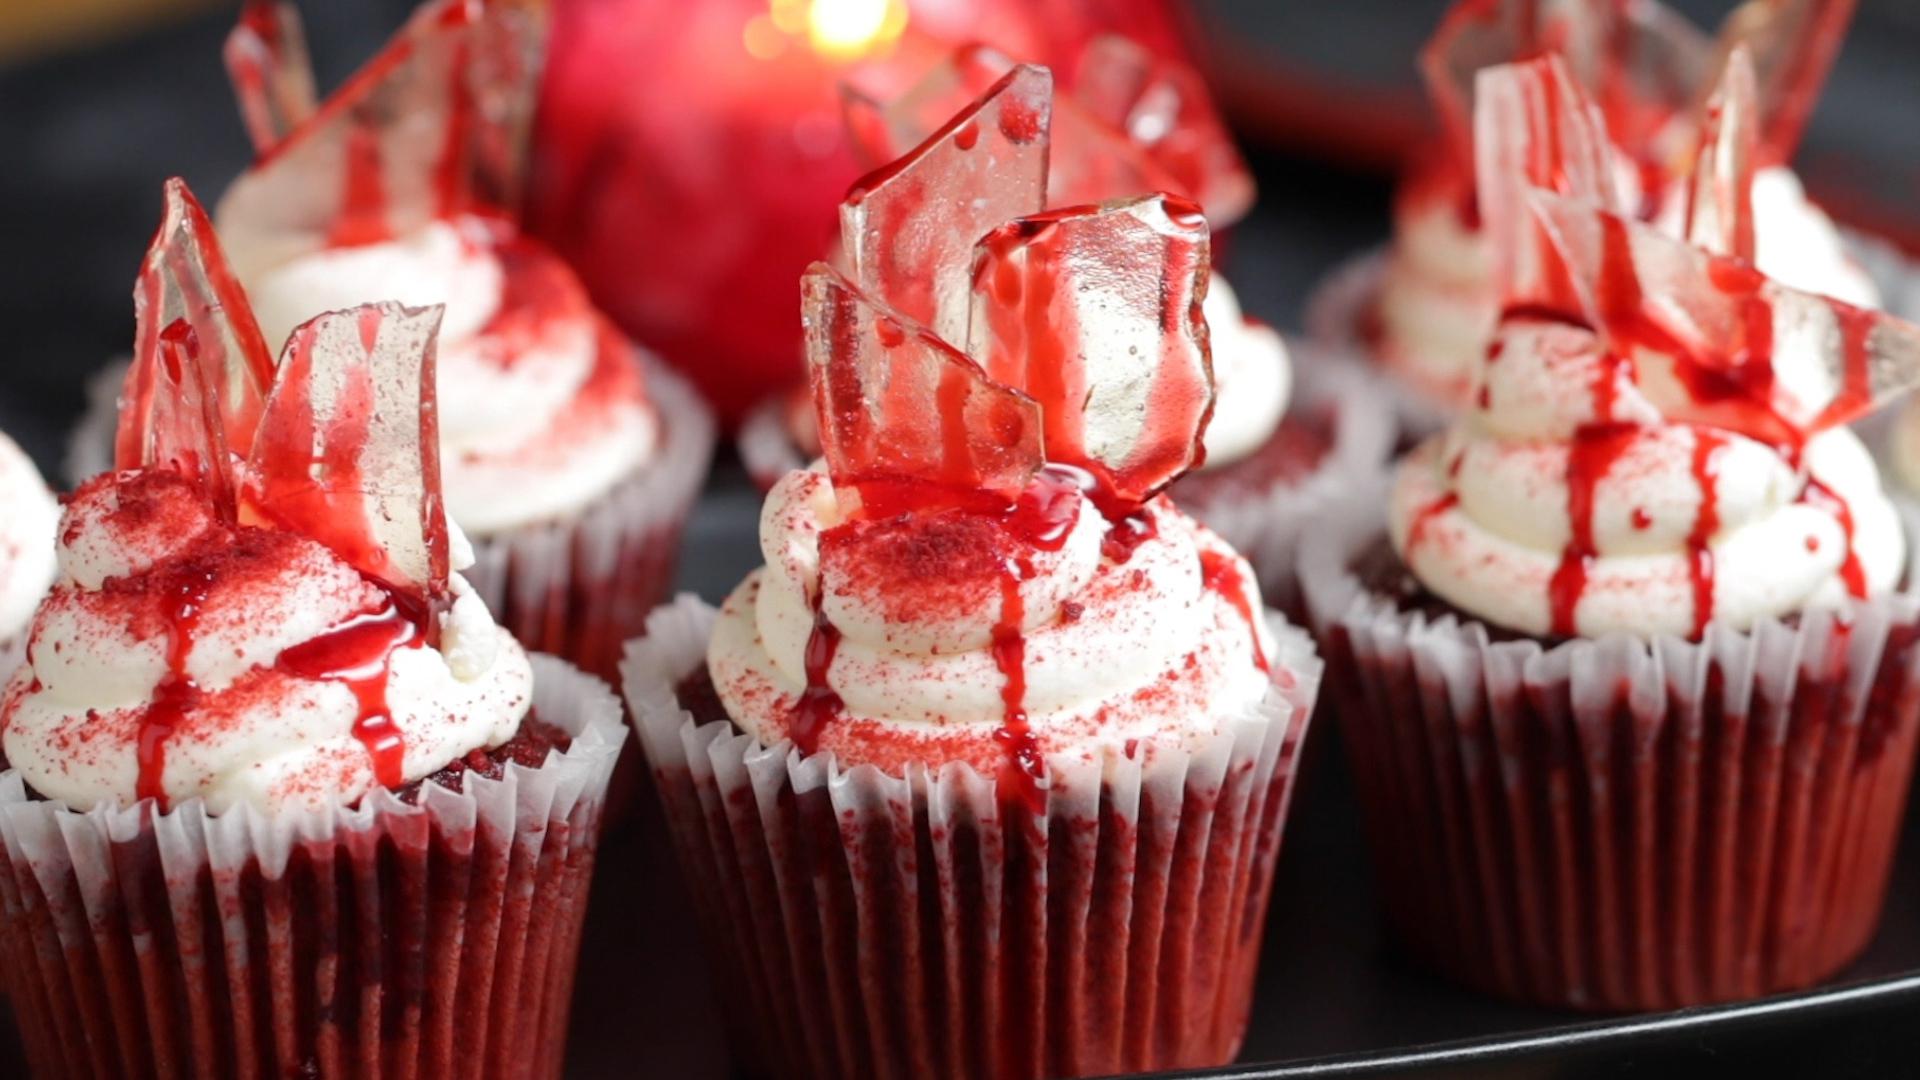 Bloody Cupcakes Recipe by Tasty